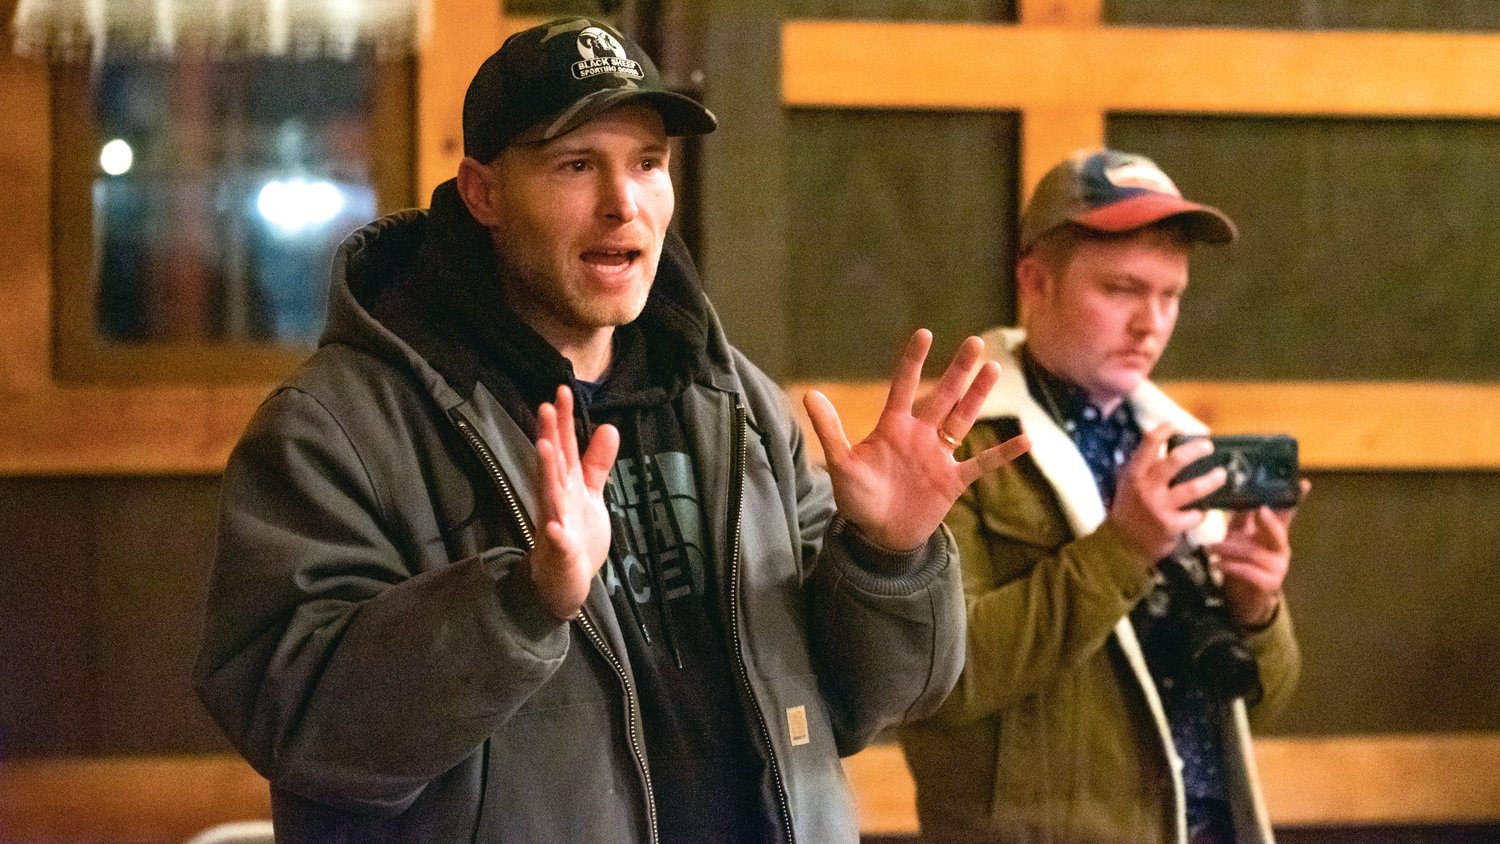 Vincent James, of Idaho, asks questions at a Wednesday night Joe Kent town hall in Onalaska as someone accompanying him, who refused to reveal his name, records the event for a YouTube channel. James told The Chronicle he drove five hours to attend the town hall.